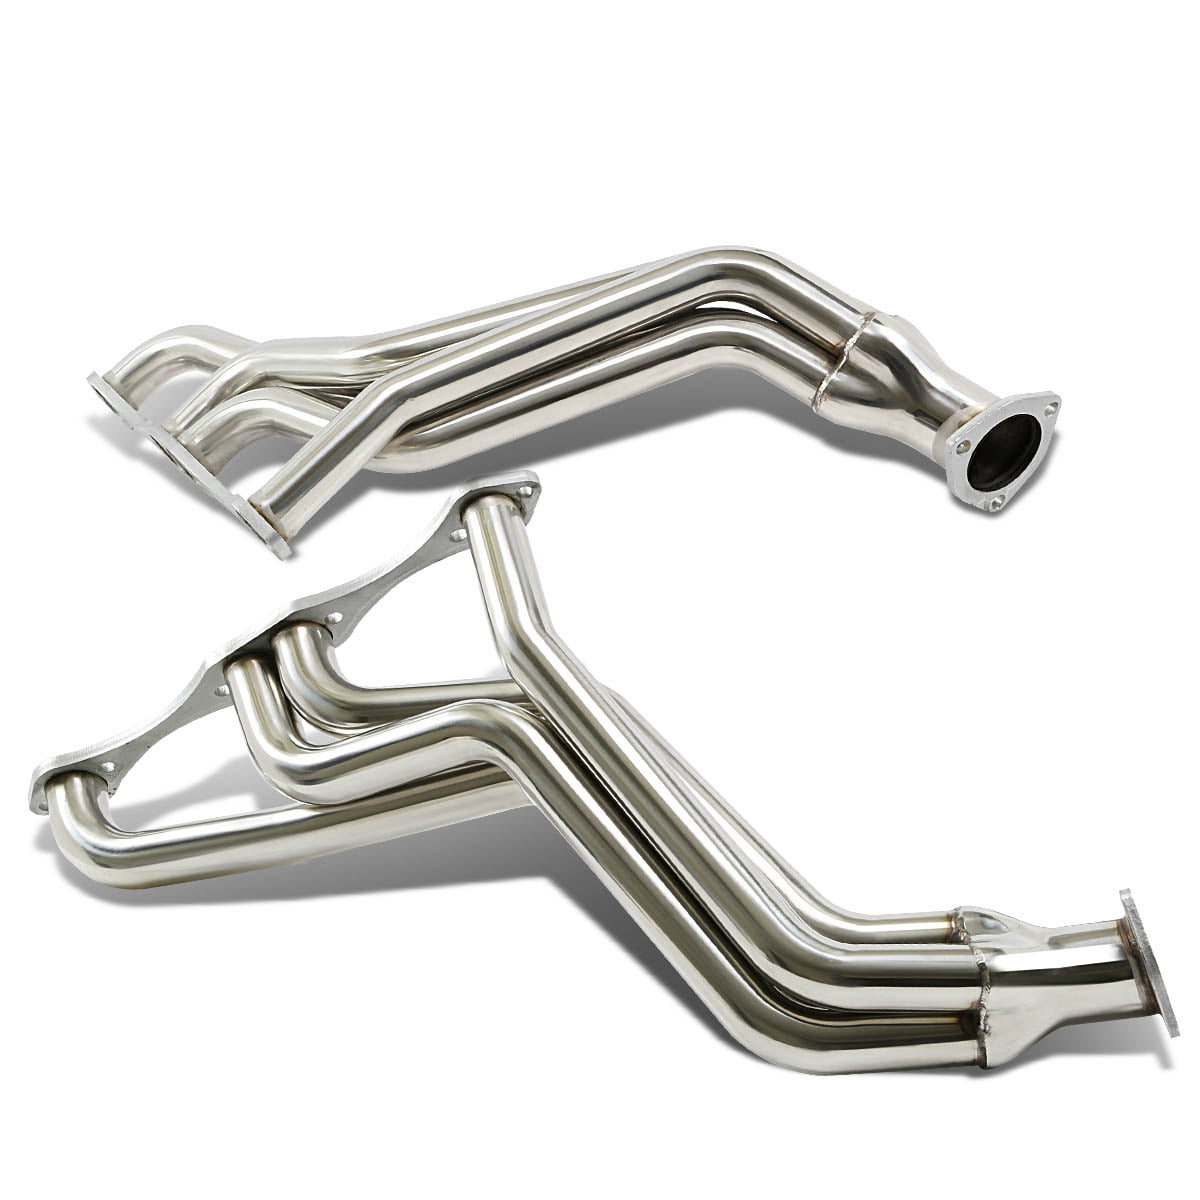 For Chevy Small Block 2x4-1 Design Stainless Steel Exhaust Header Kit T1 Polished Chrome 267-400 V8 